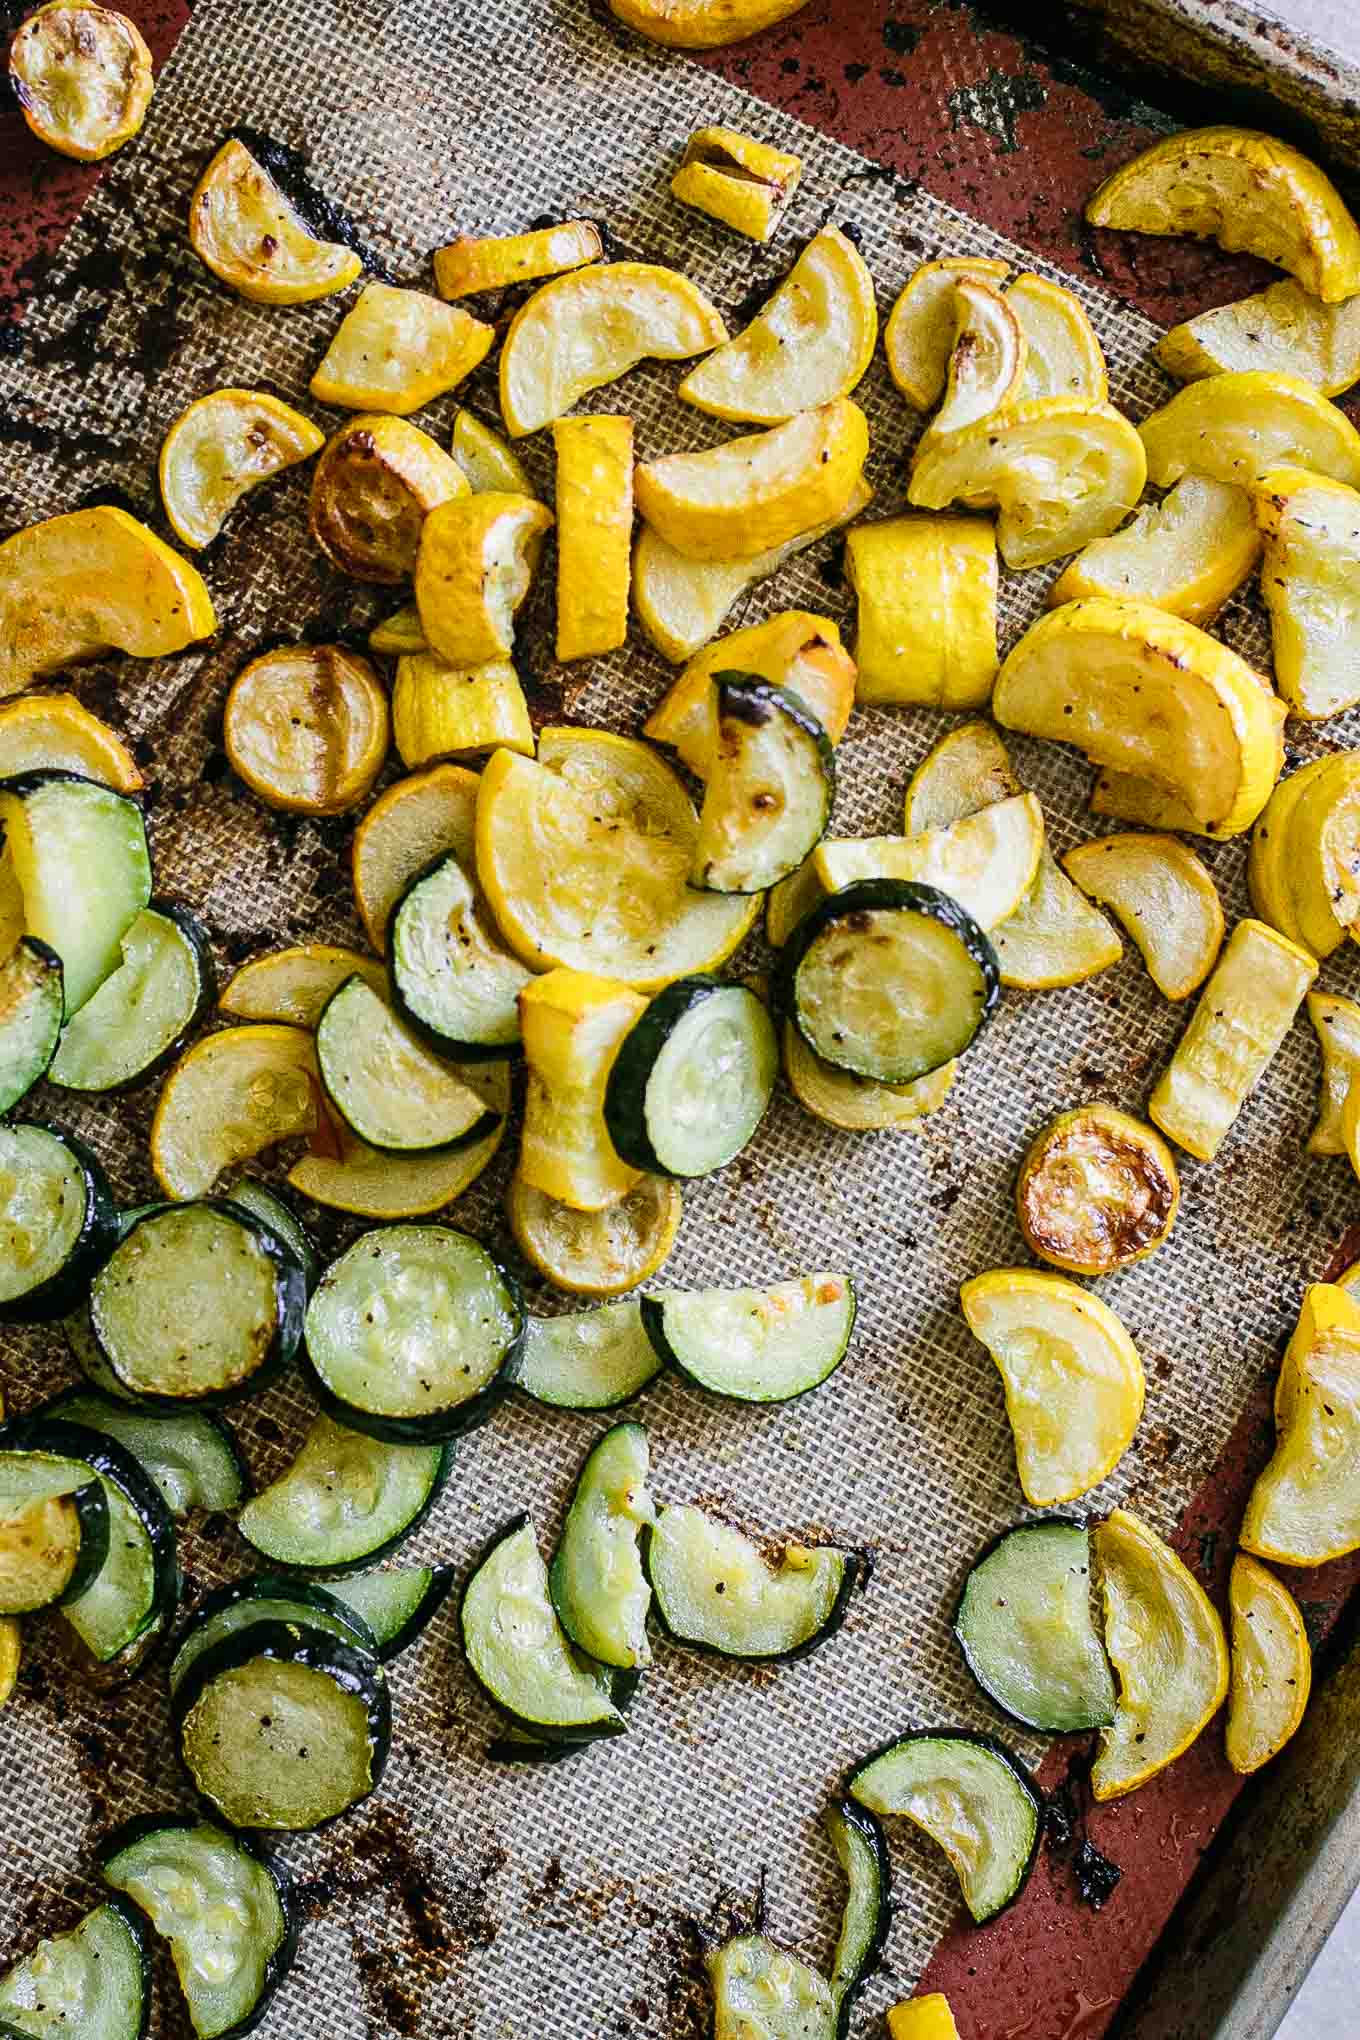 roasted yellow squash and zucchini on a baking sheet after cooking